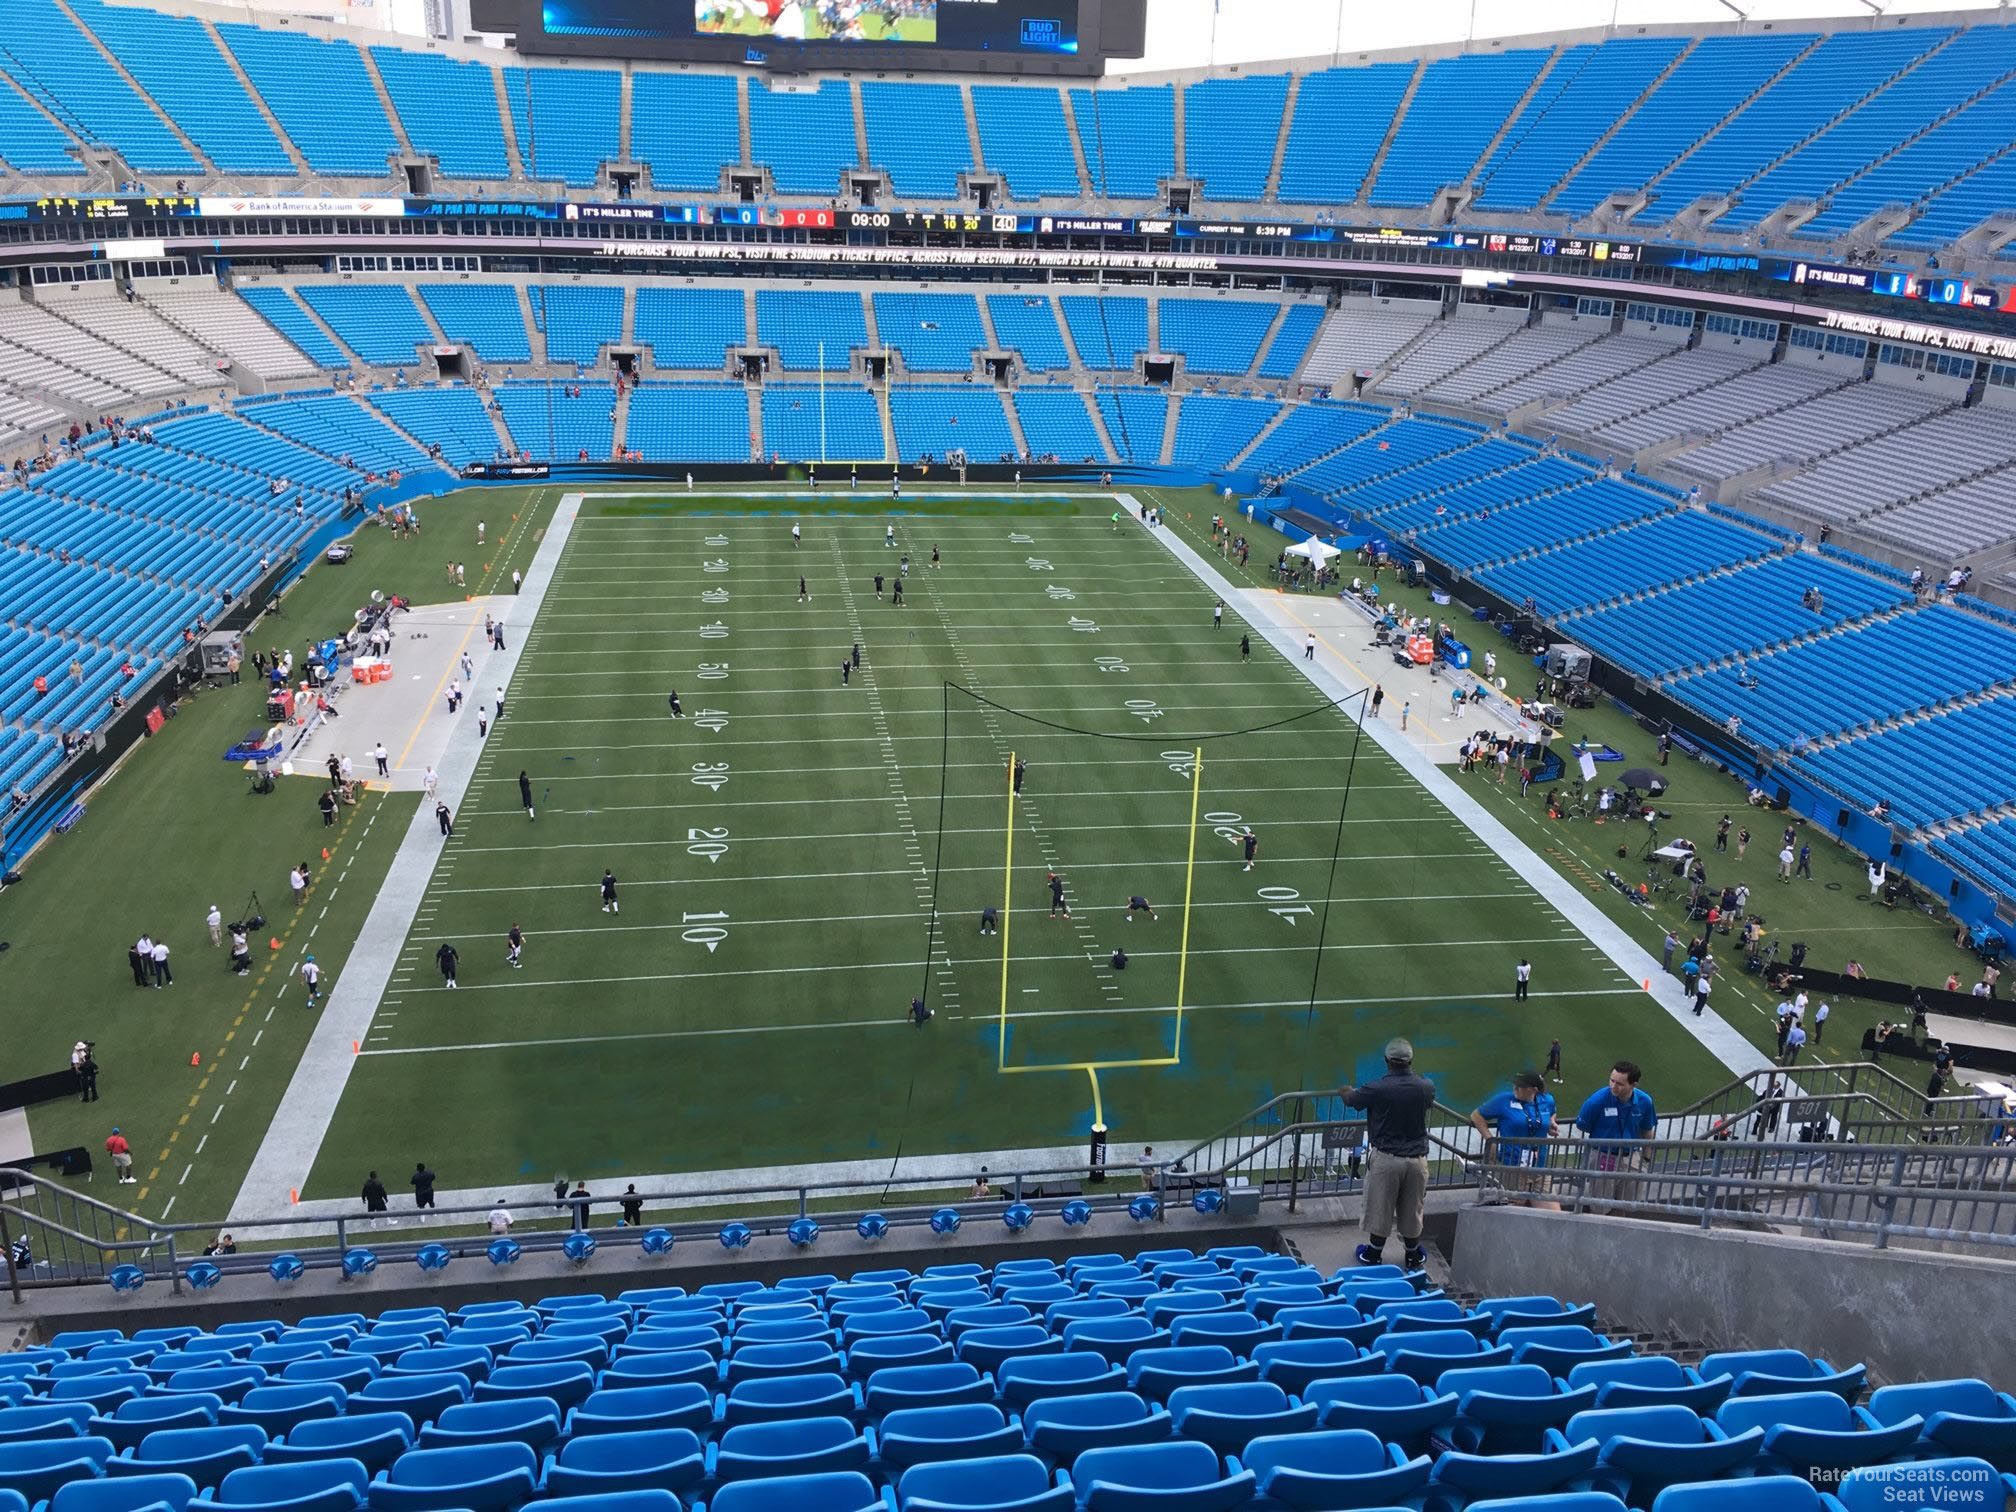 section 502, row 9 seat view  for football - bank of america stadium